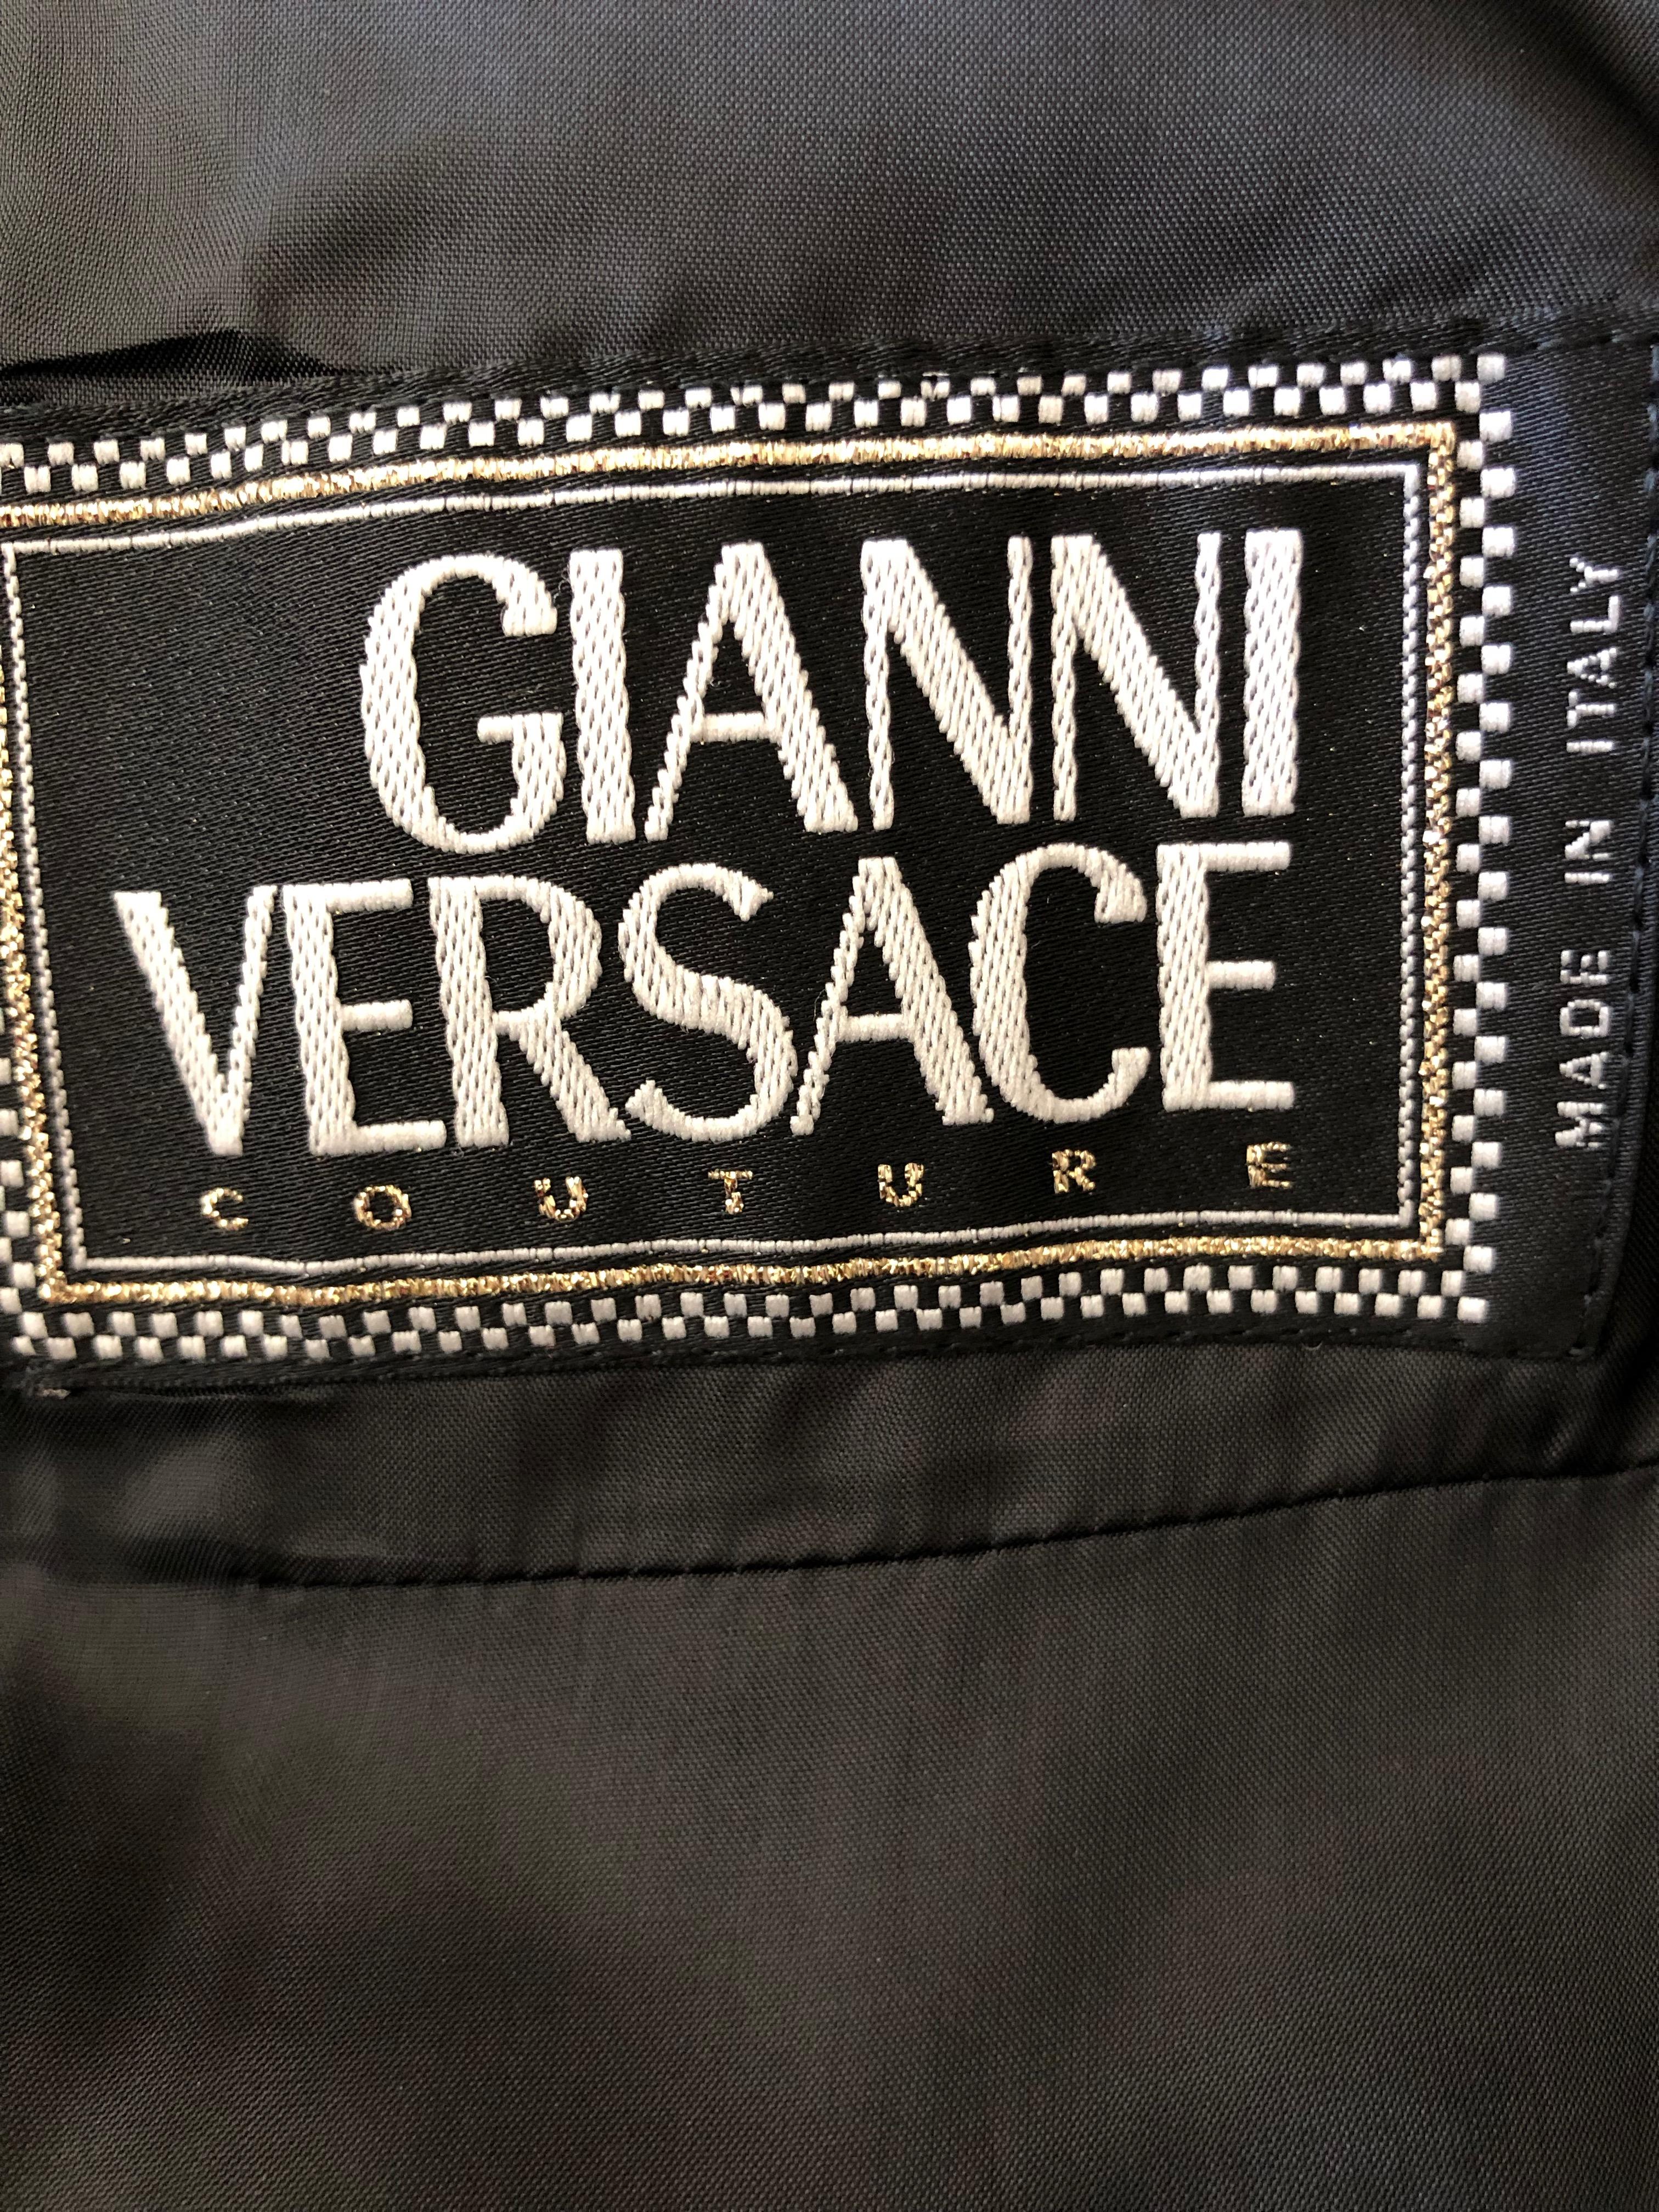 Black Gianni Versace Couture Fall 1990 Op Art Pattern Cotton Silk Blend Suit For Sale